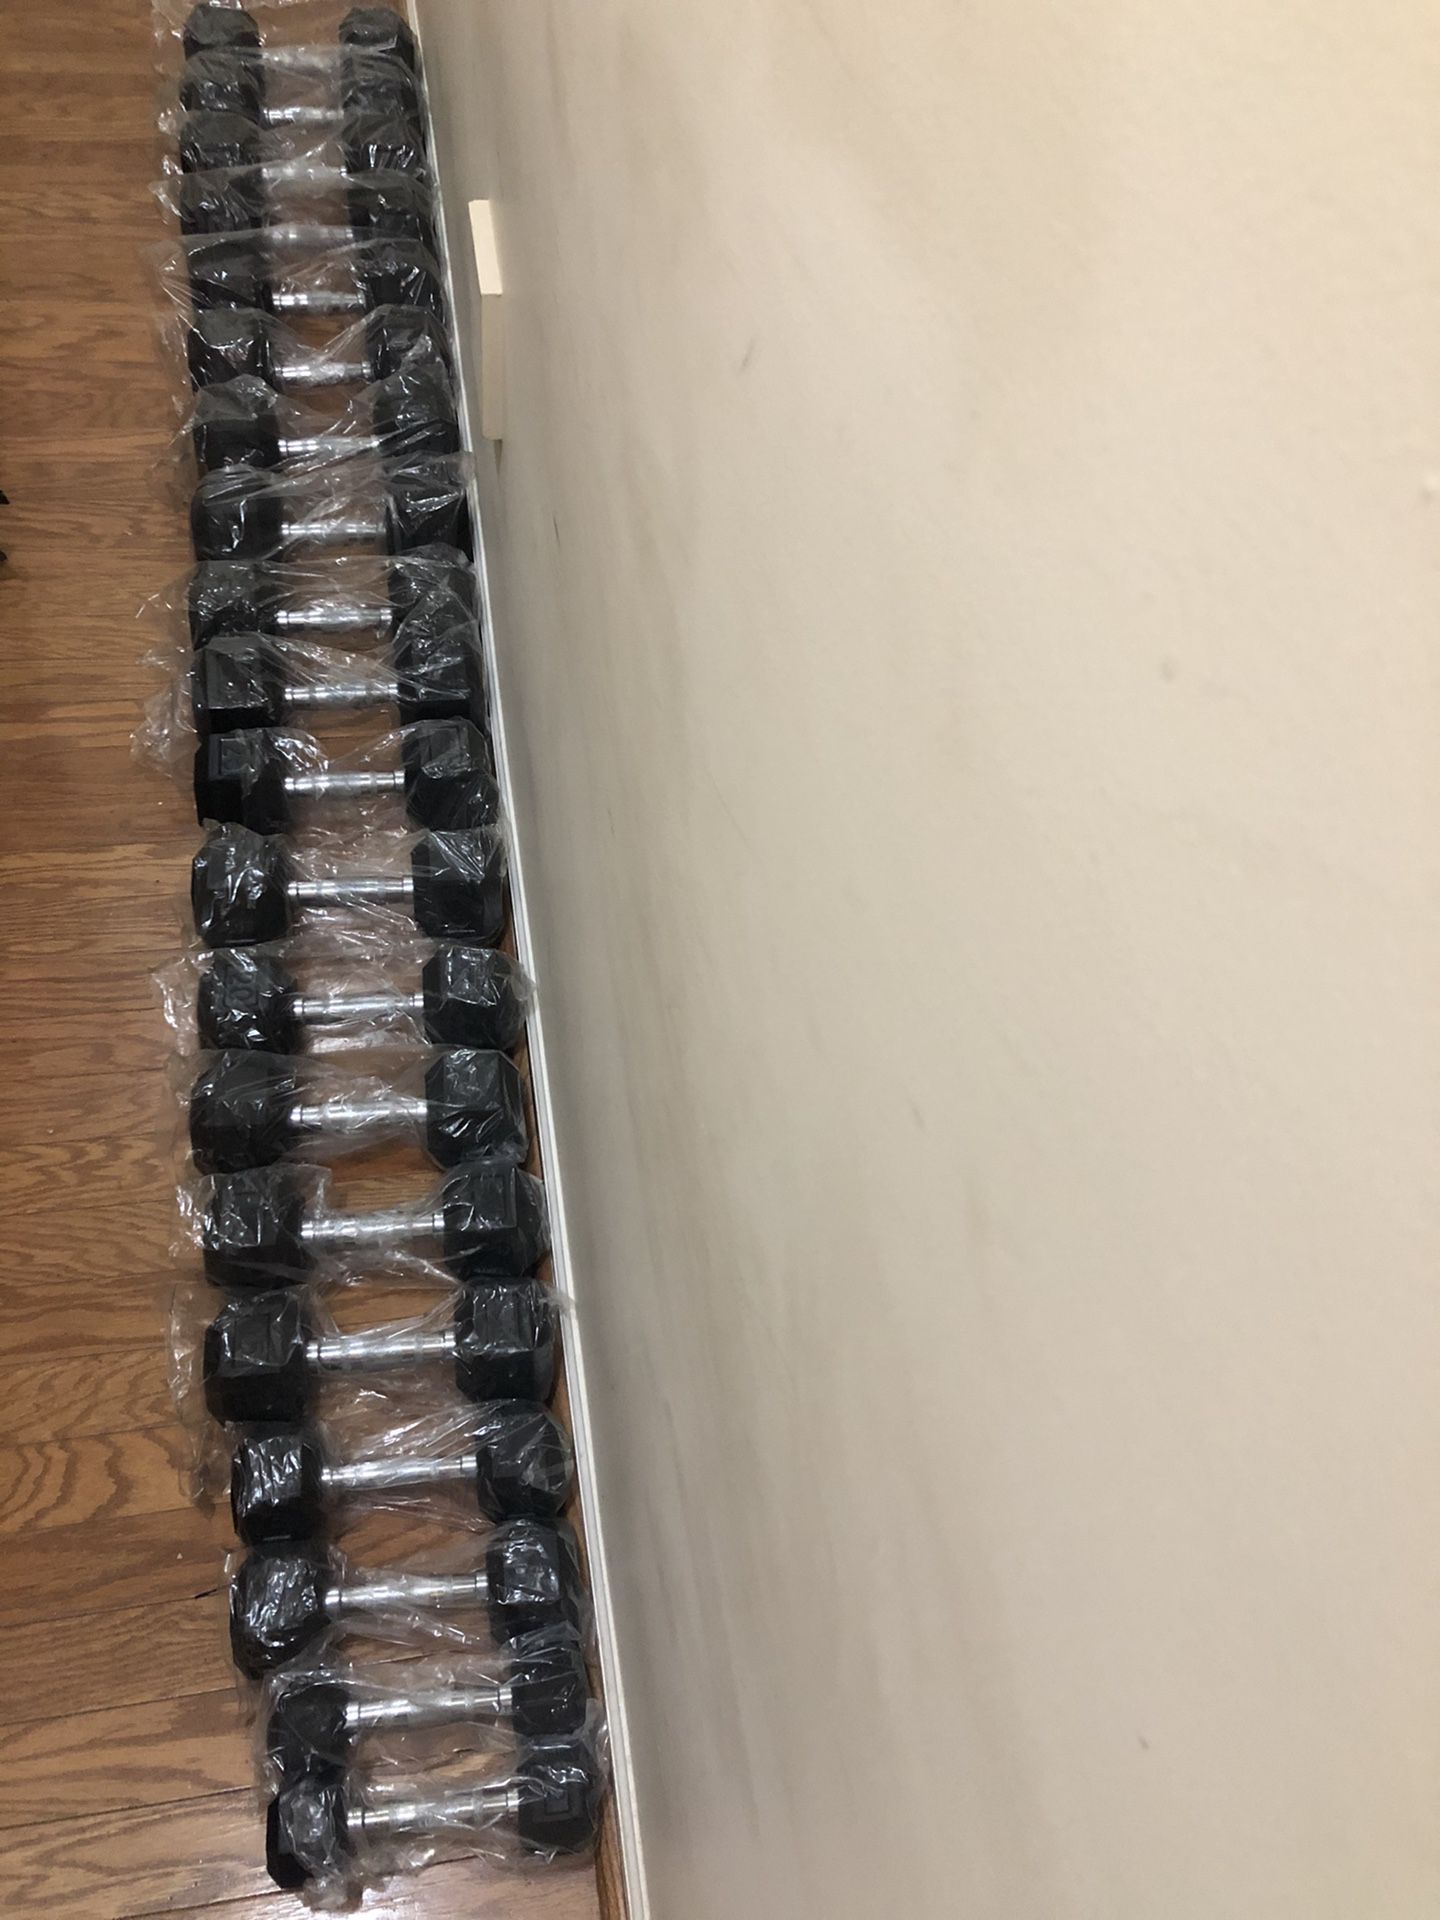 XMark Fitness 550 lbs hex dumbbell set with rack 5 lbs increments to 50 new never used